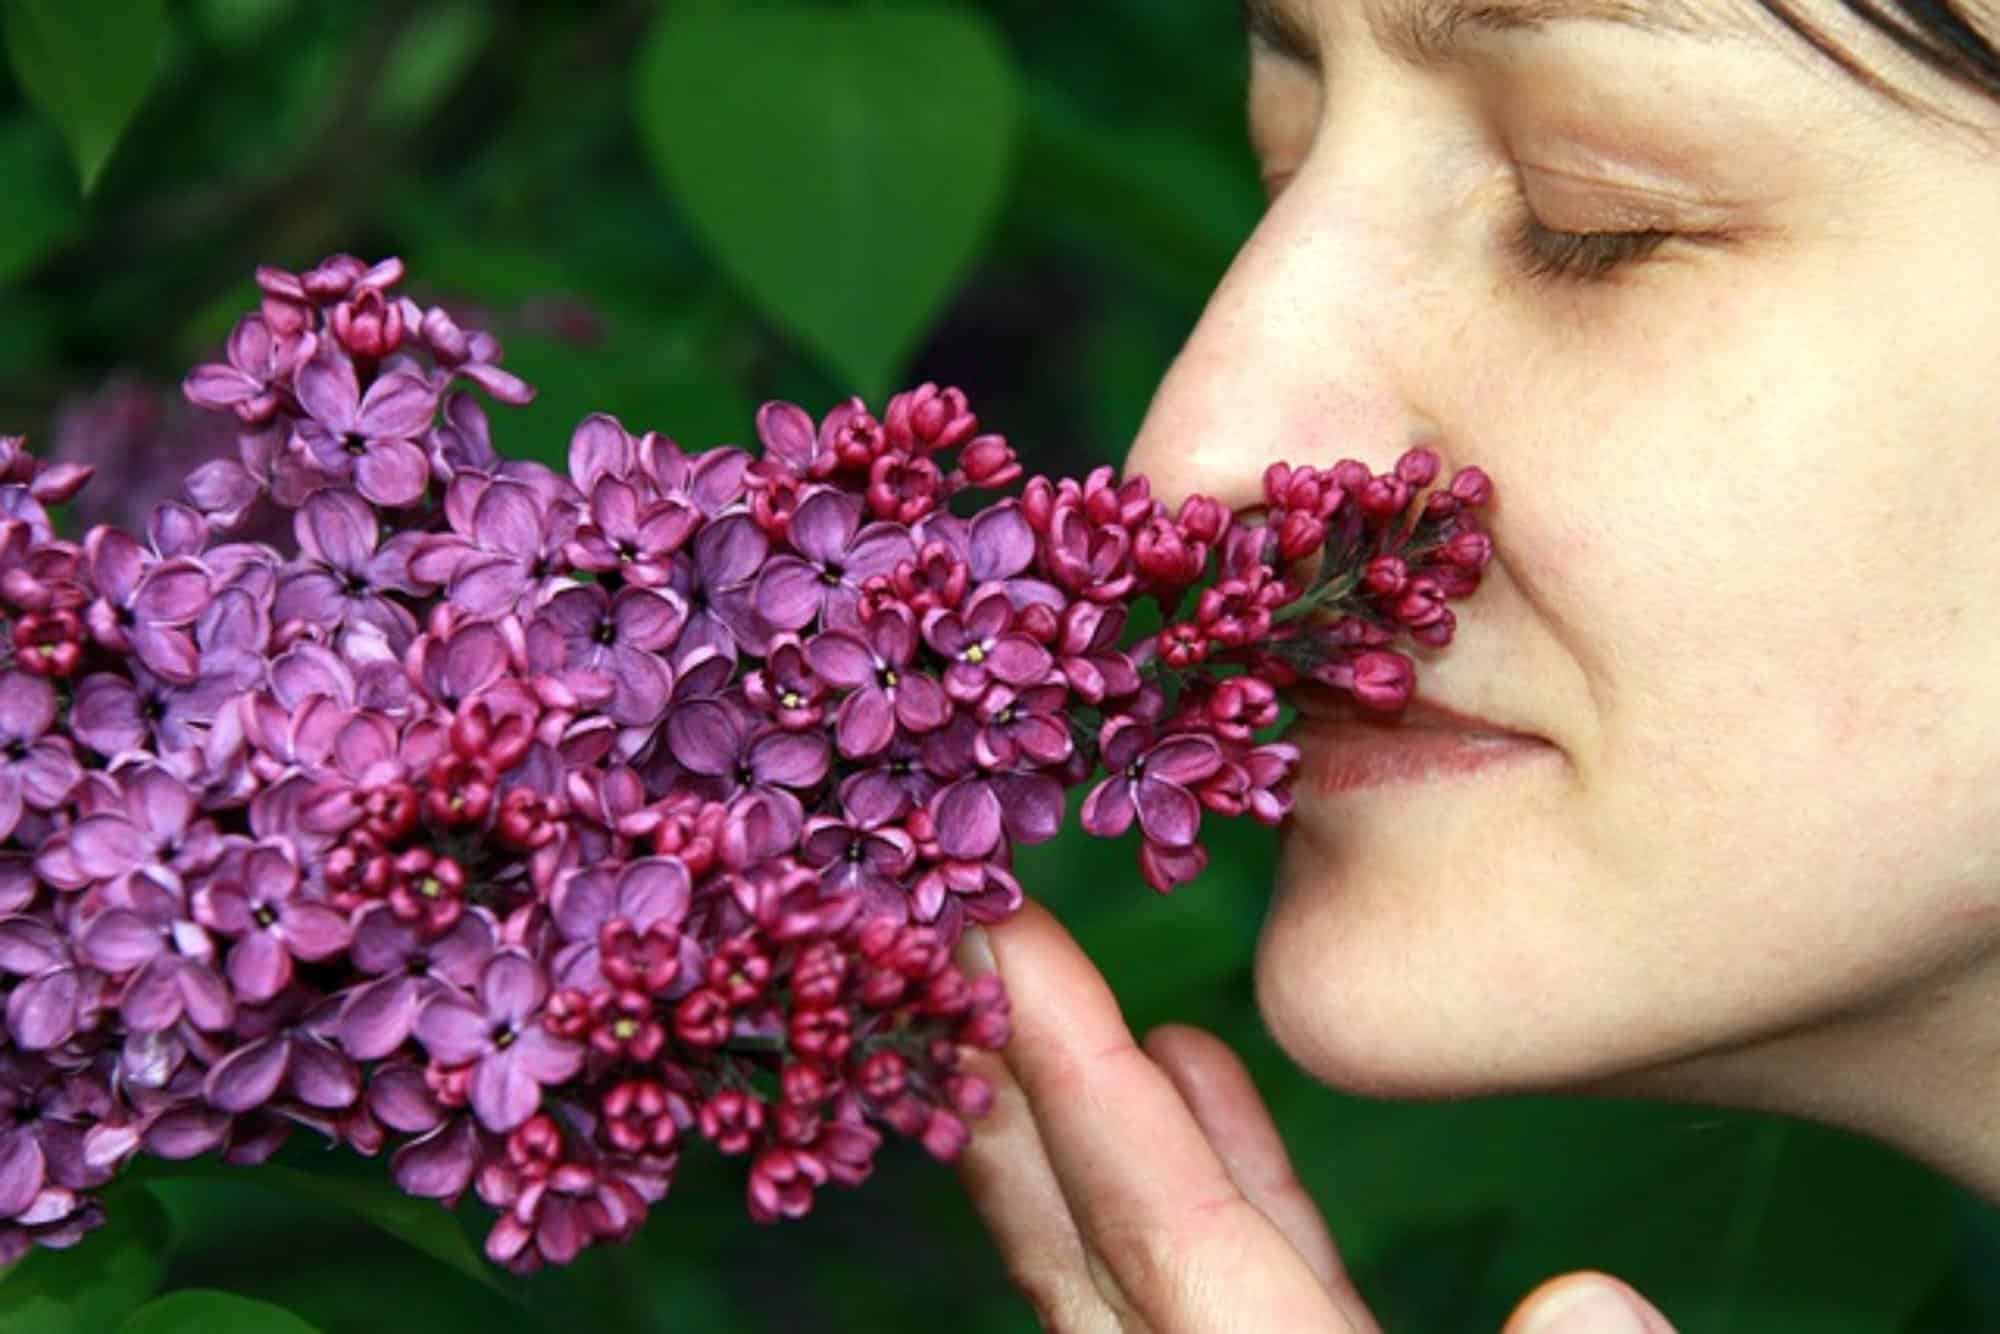 Losing a sense of smell can lead to accidents